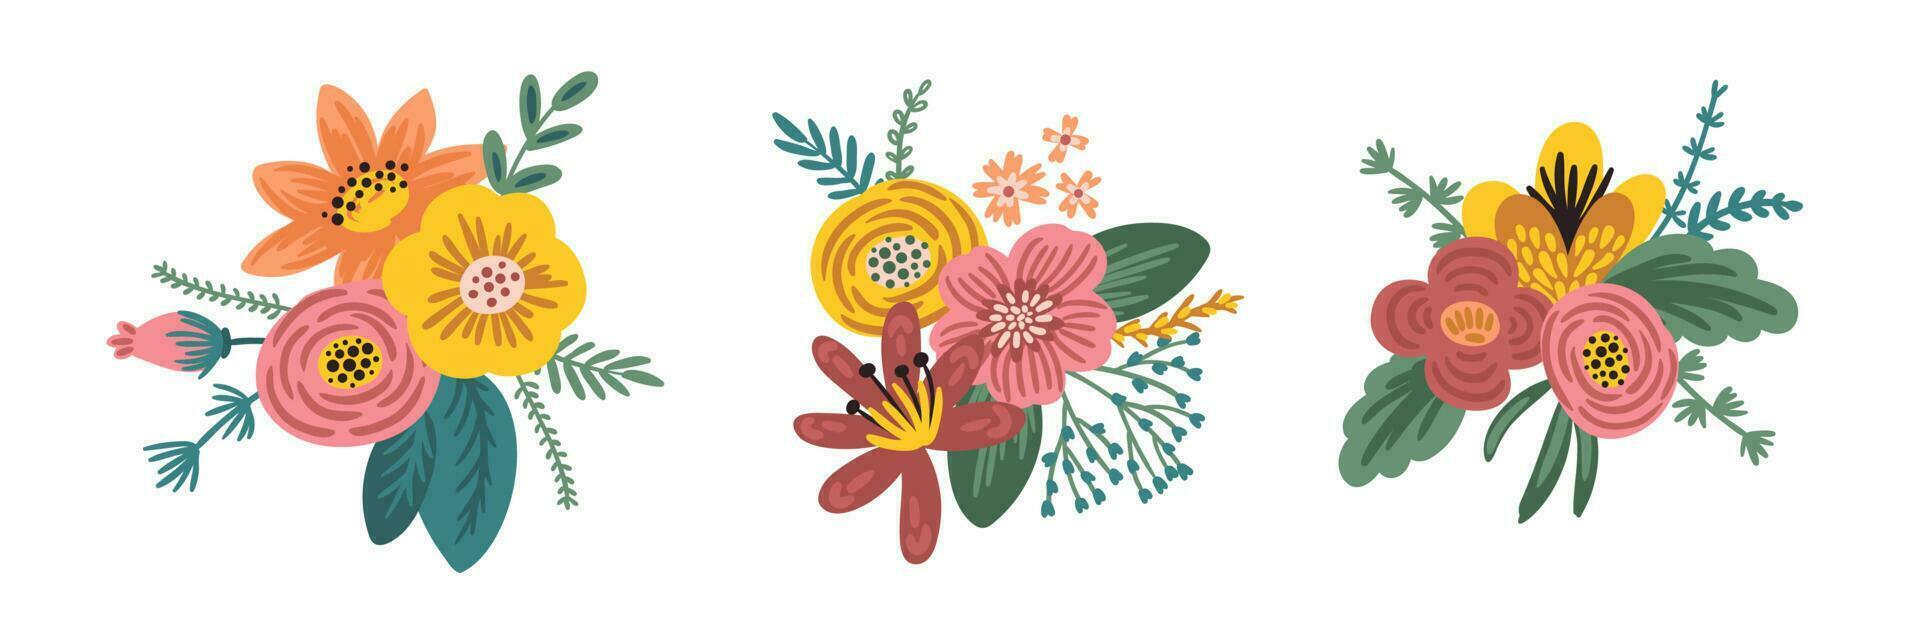 Vector illustration bouquets of flowers. Design template for card, poster, flyer and other use